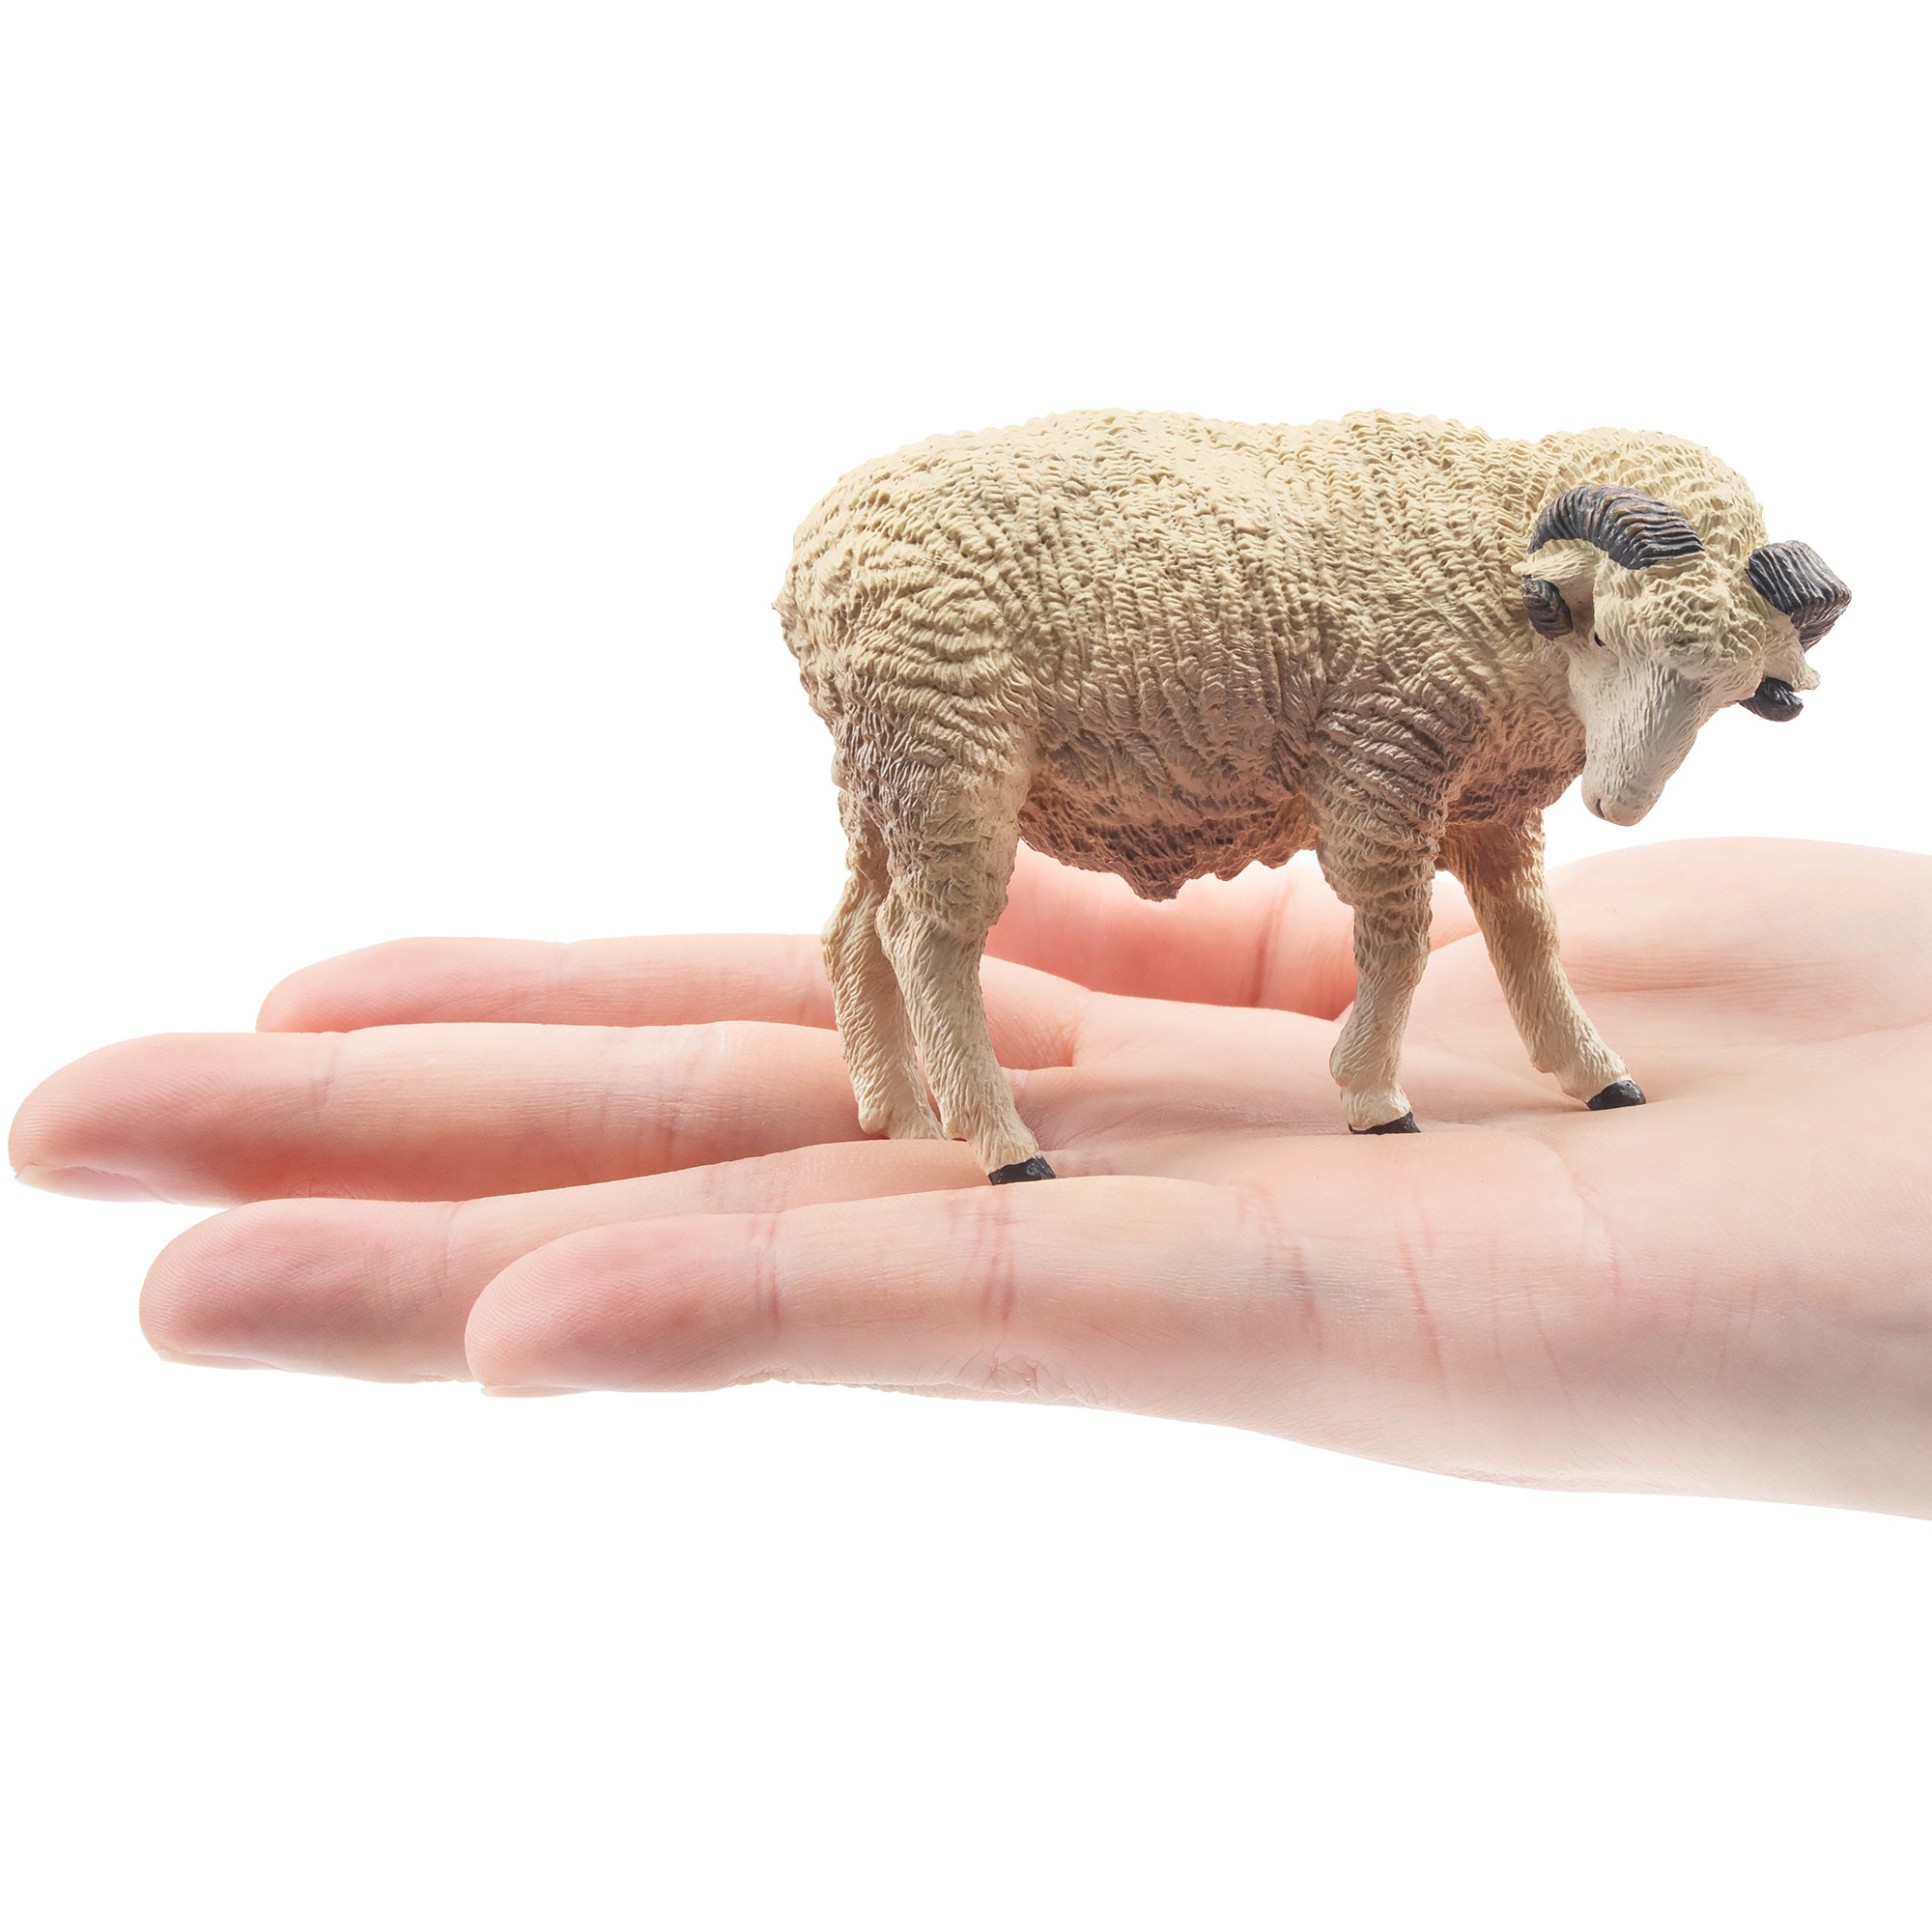 Toymany Grazing Light-Haired Ram Figurine Toy-on hand